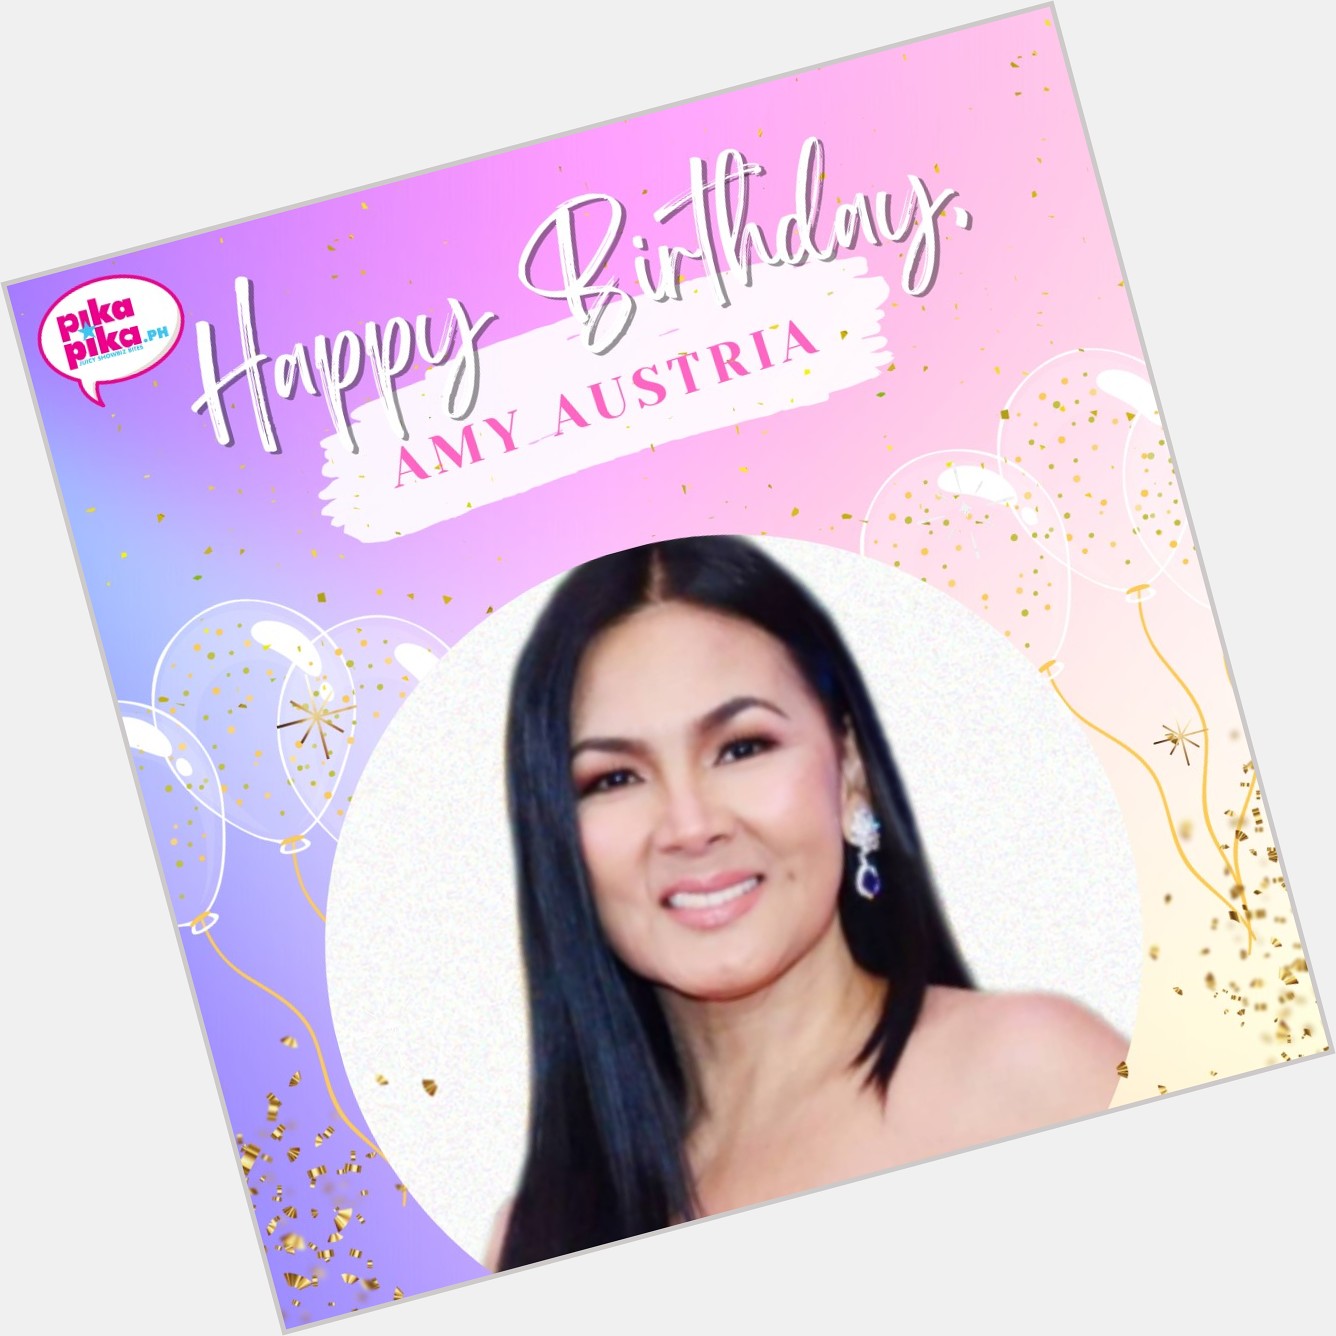 Happy birthday, Amy Austria! May your special day be filled with love and cheers.    